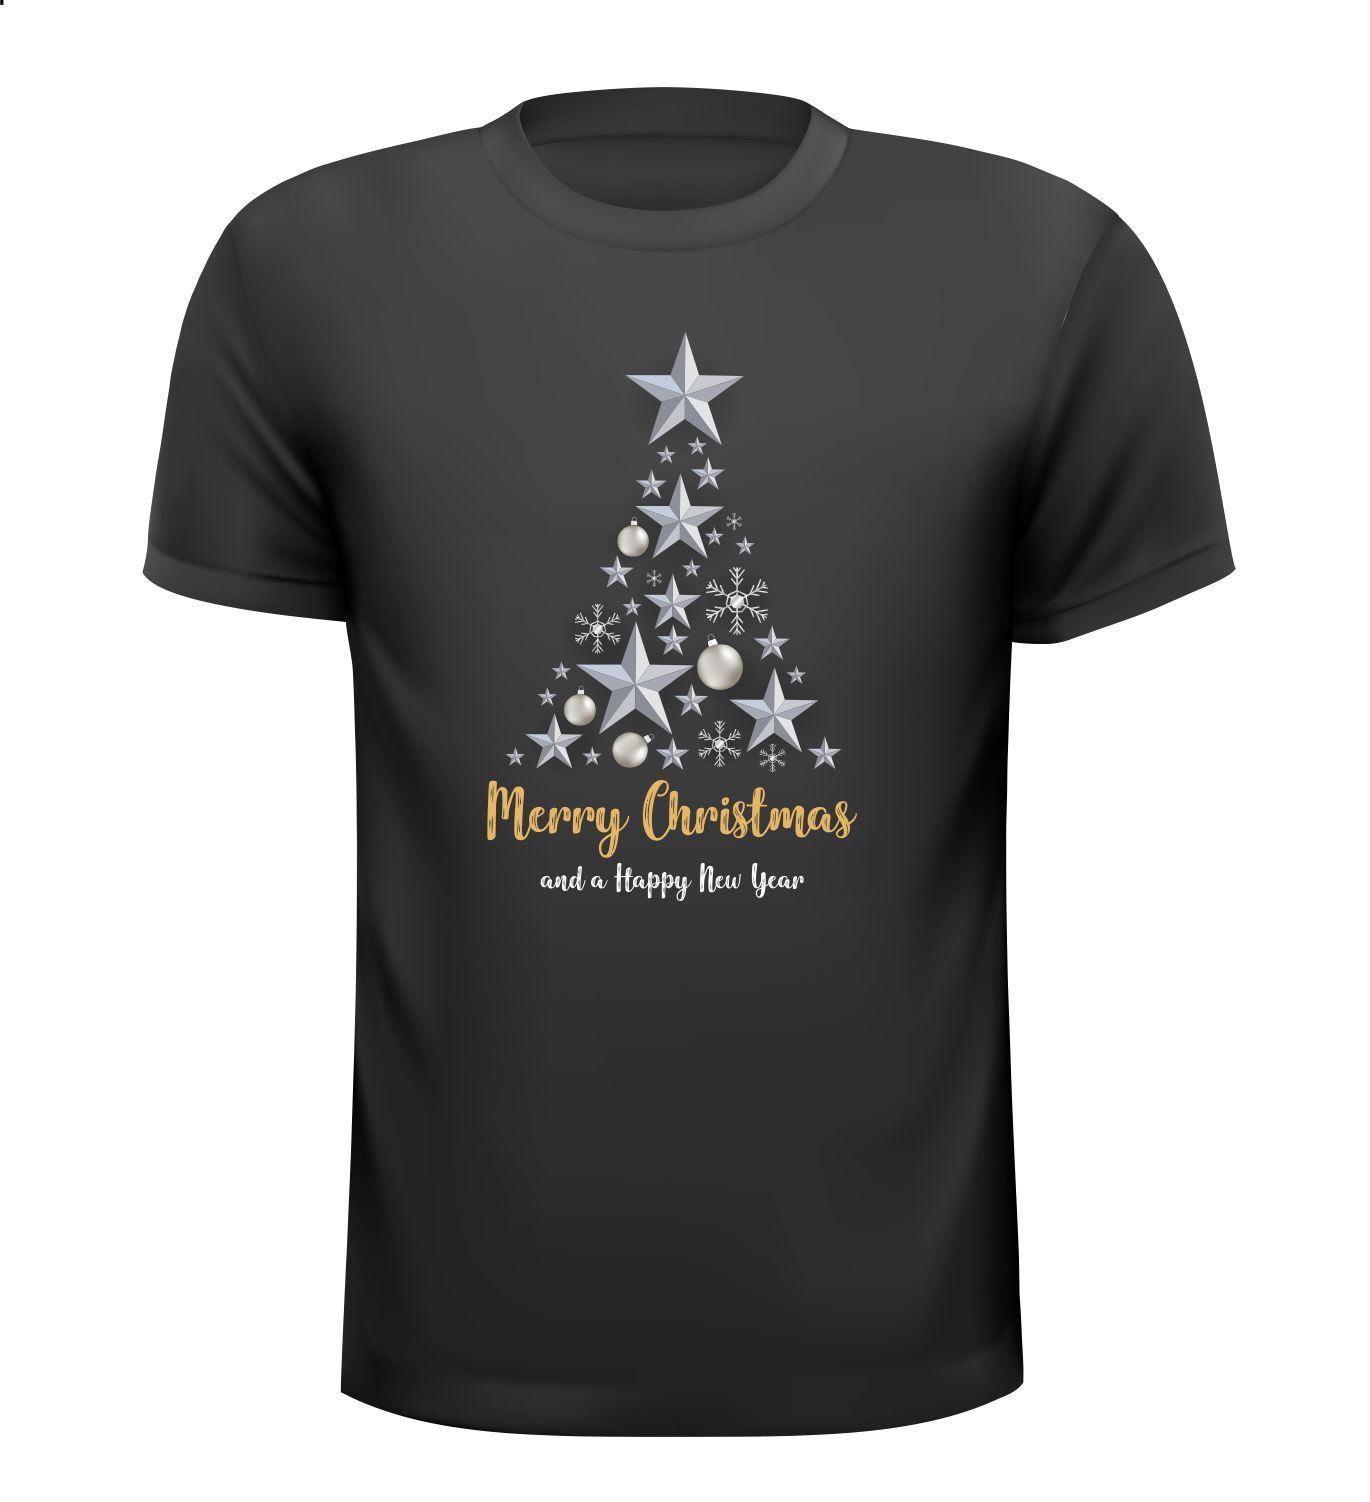 T-shirt Merry Christmas and a happy new year